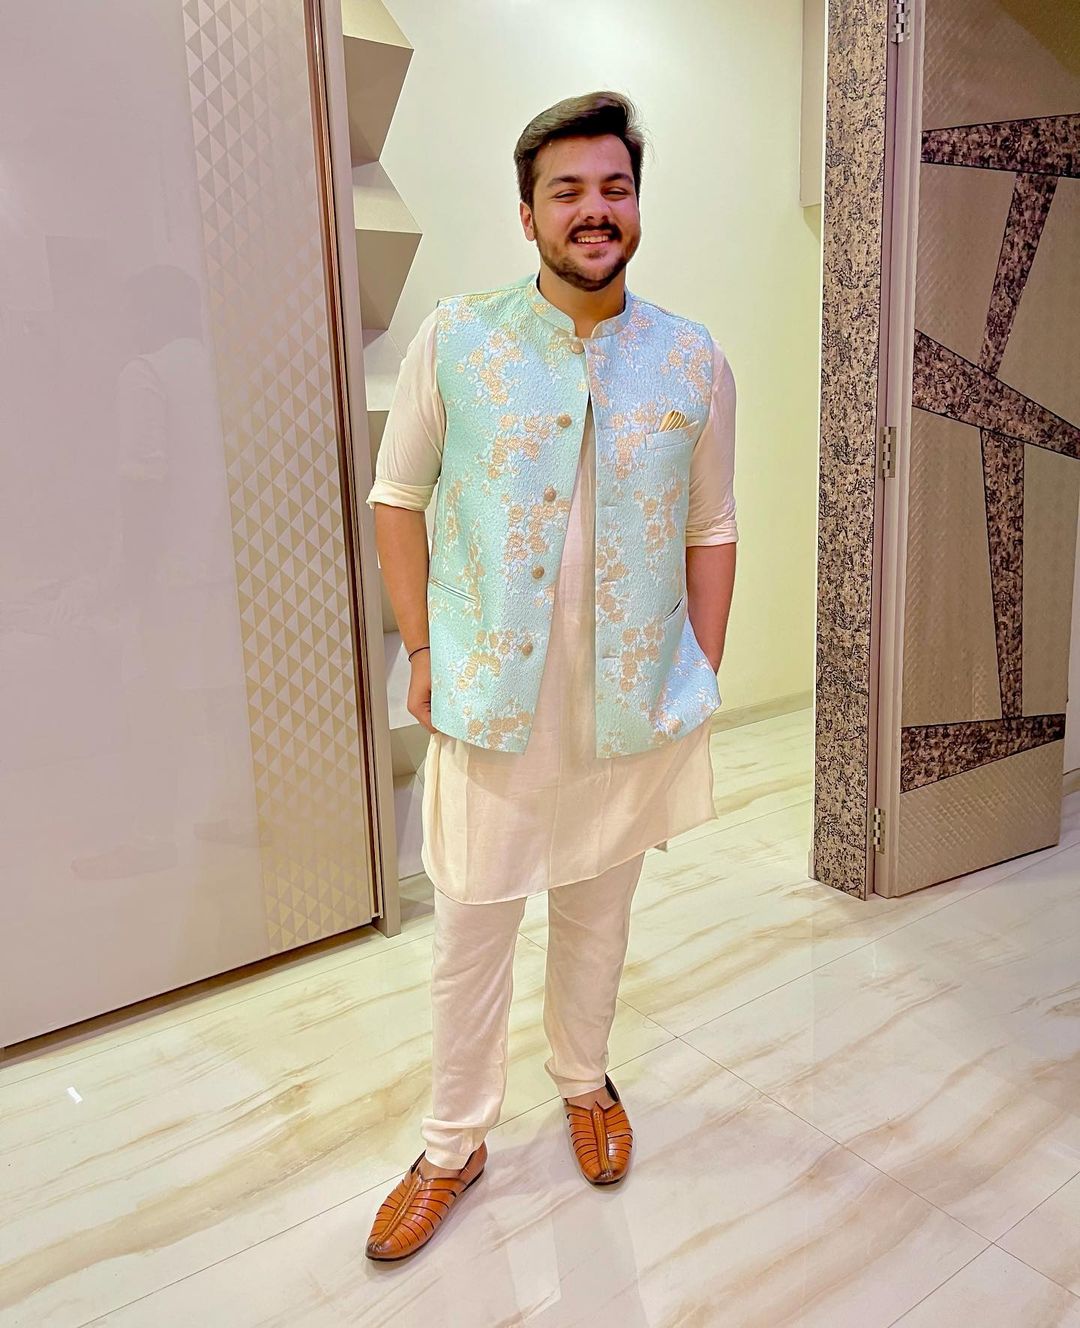 Ashish Chanchlani or Bhuvan Bam: Who looks more stylish in traditional outfit? 4505